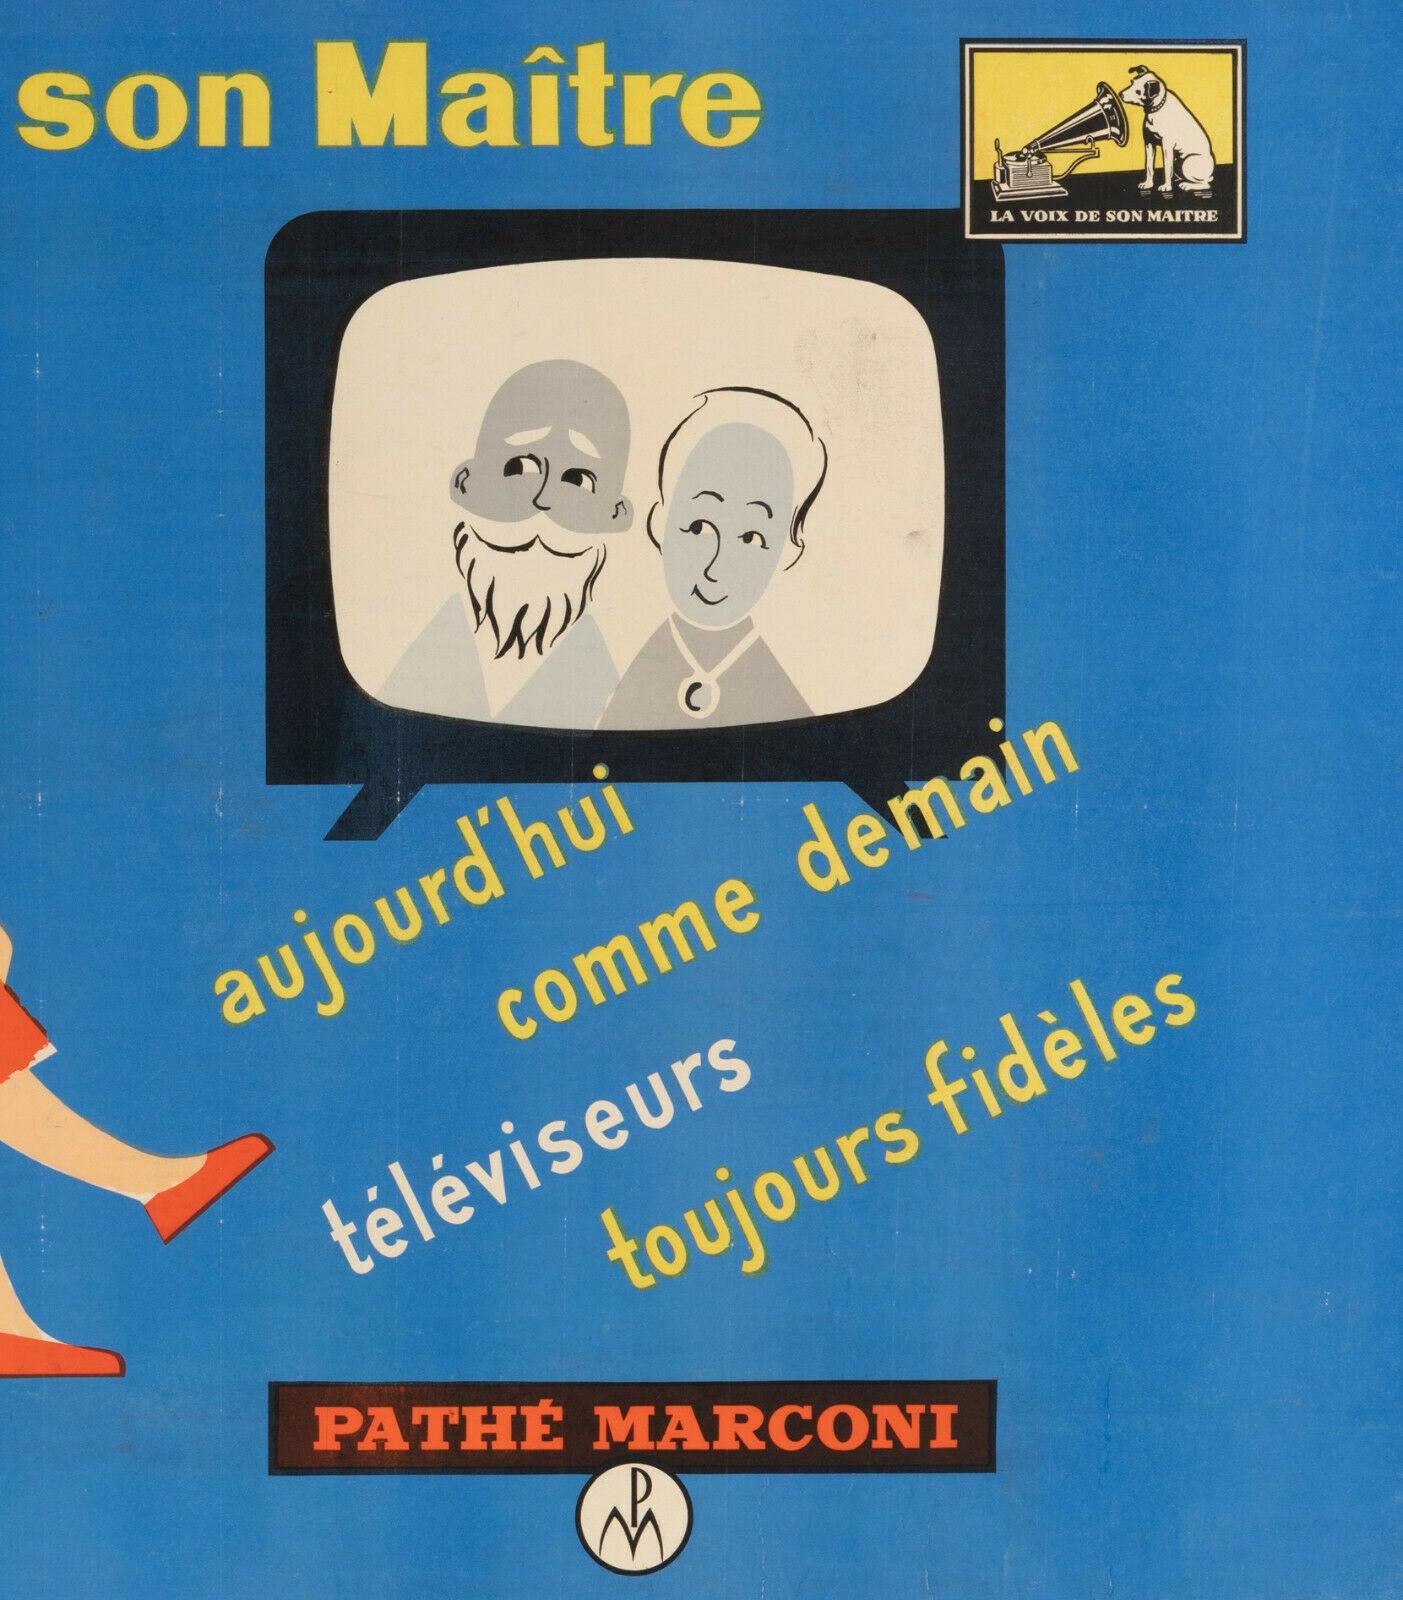 Original Poster-His Master's Voice-His Master's Voice-Pathe Marconi, c.1955

Poster for the promotion of Pathé Marconi televisions.

Additional Details:
Materials and Techniques: Colour lithograph on paper
Color: Blue
Features: Signed
Style: